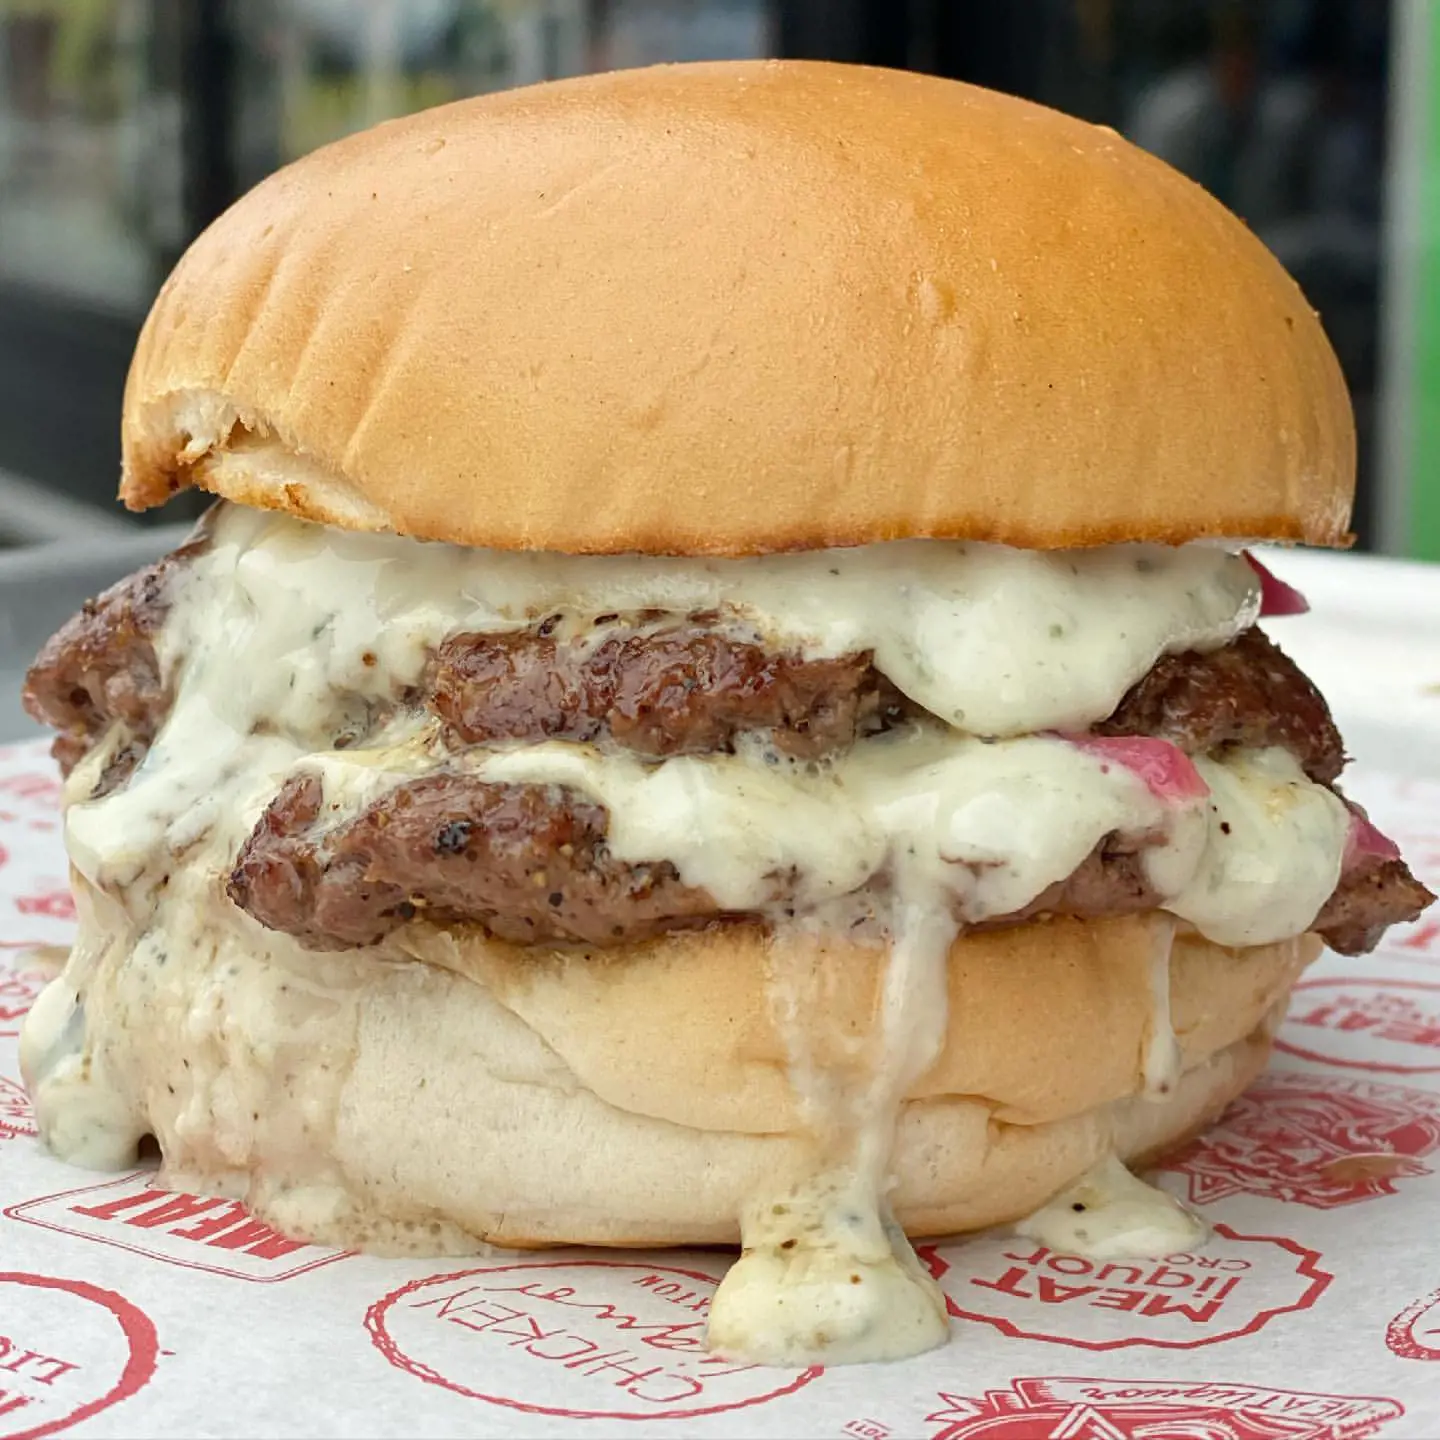 Double patty, minced pickled Pink onions, 1924 Blue cheese sauce.